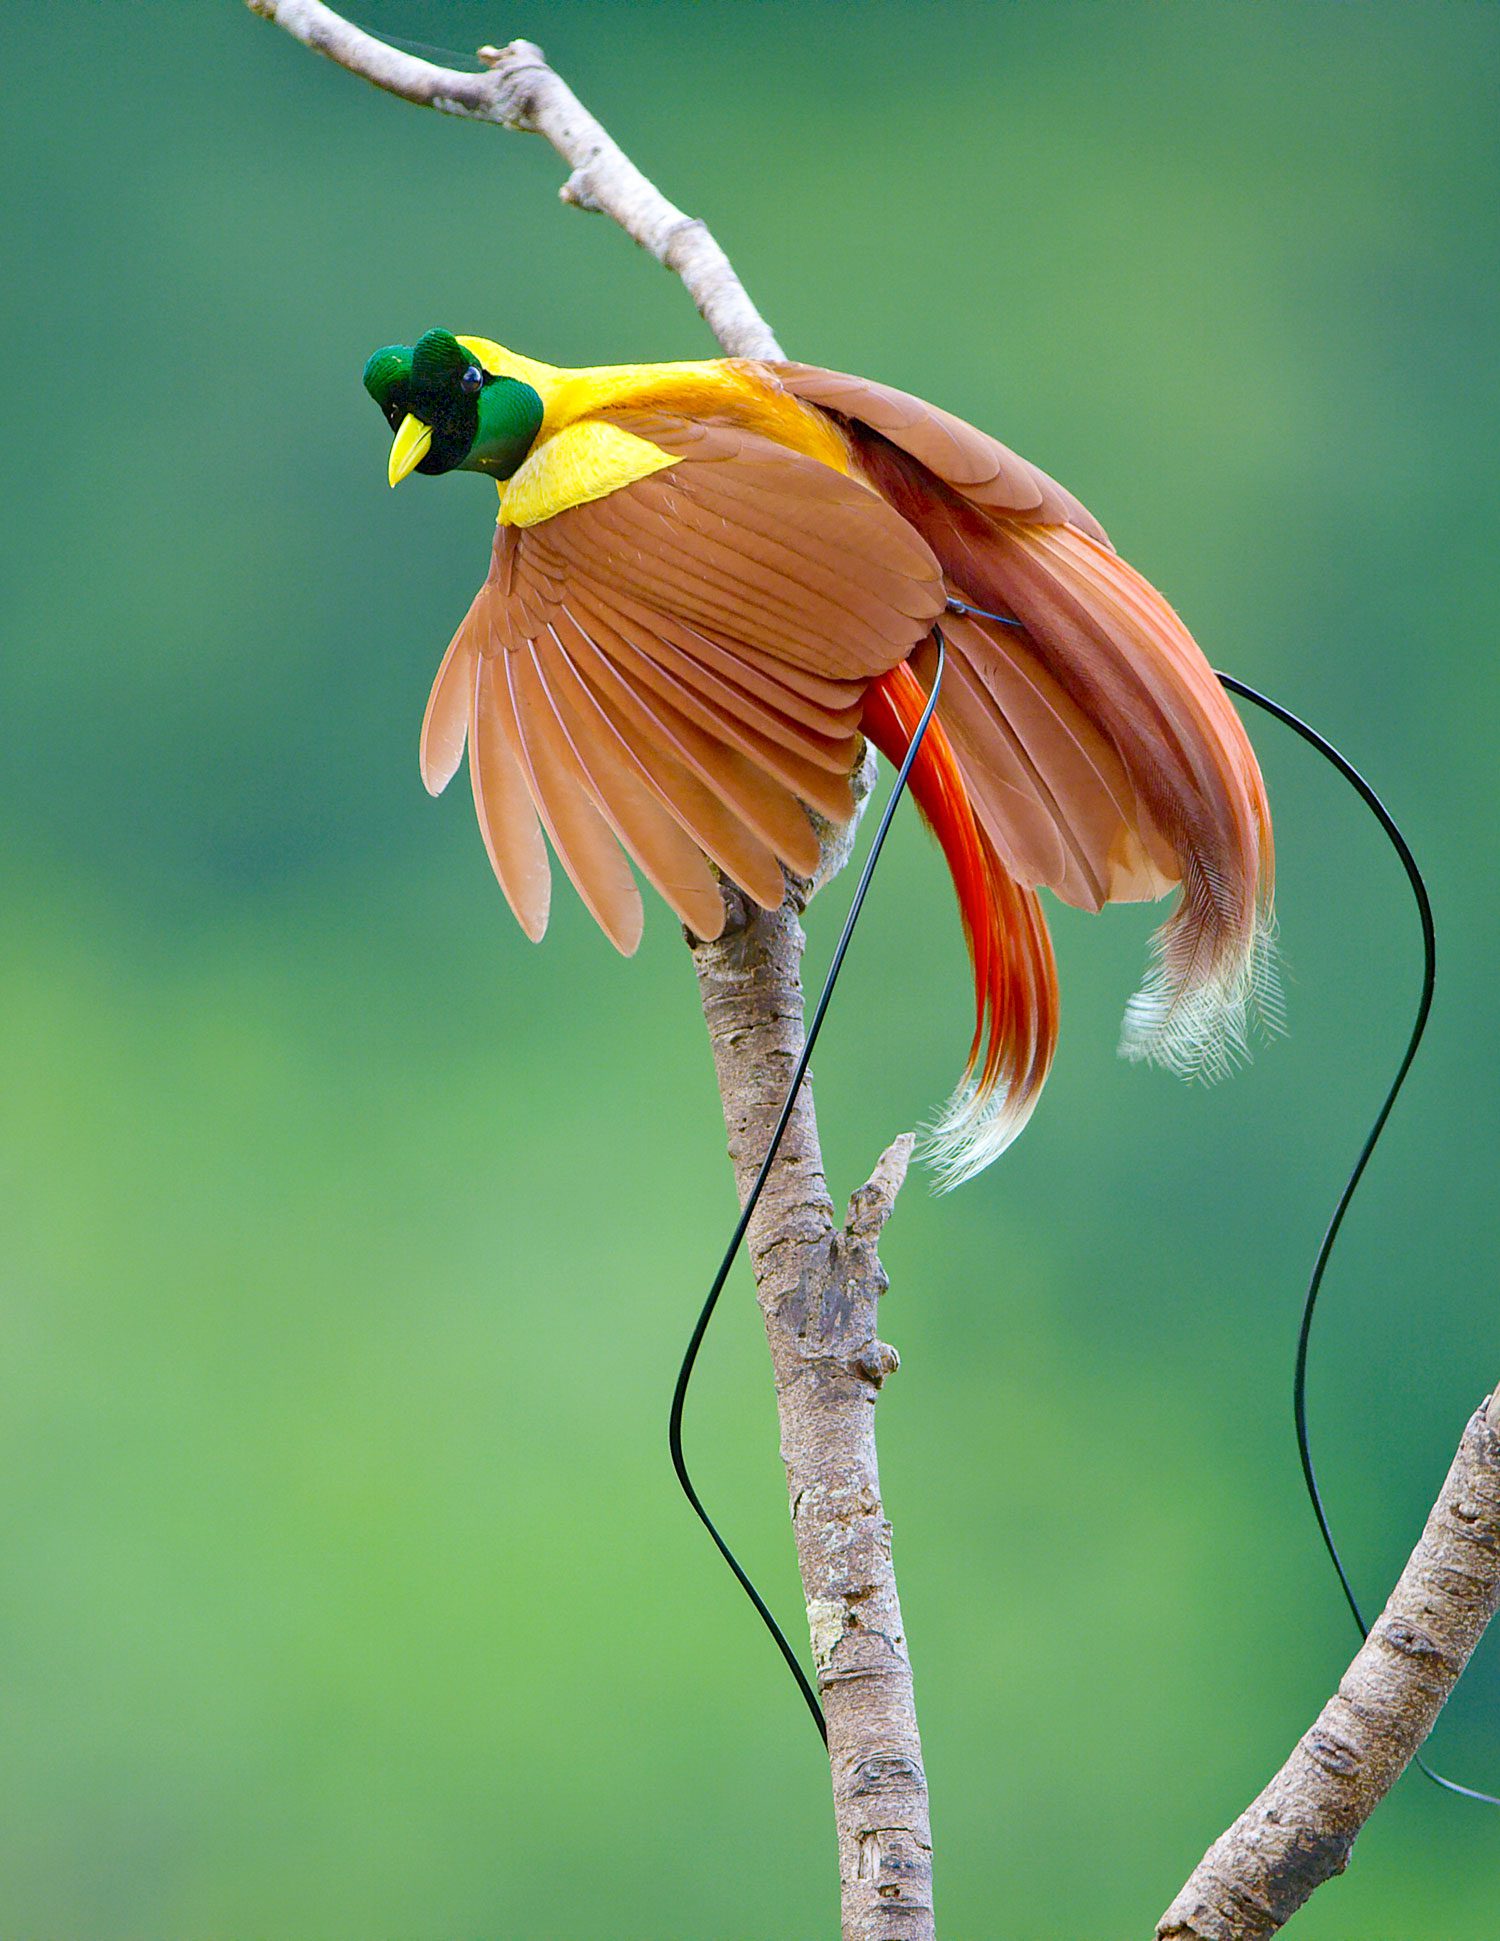 A Red Bird-of-Paradise flares his plumes in a dramatic breeding display among the rainforest treetops in New Guinea. Photo by Tim Laman.